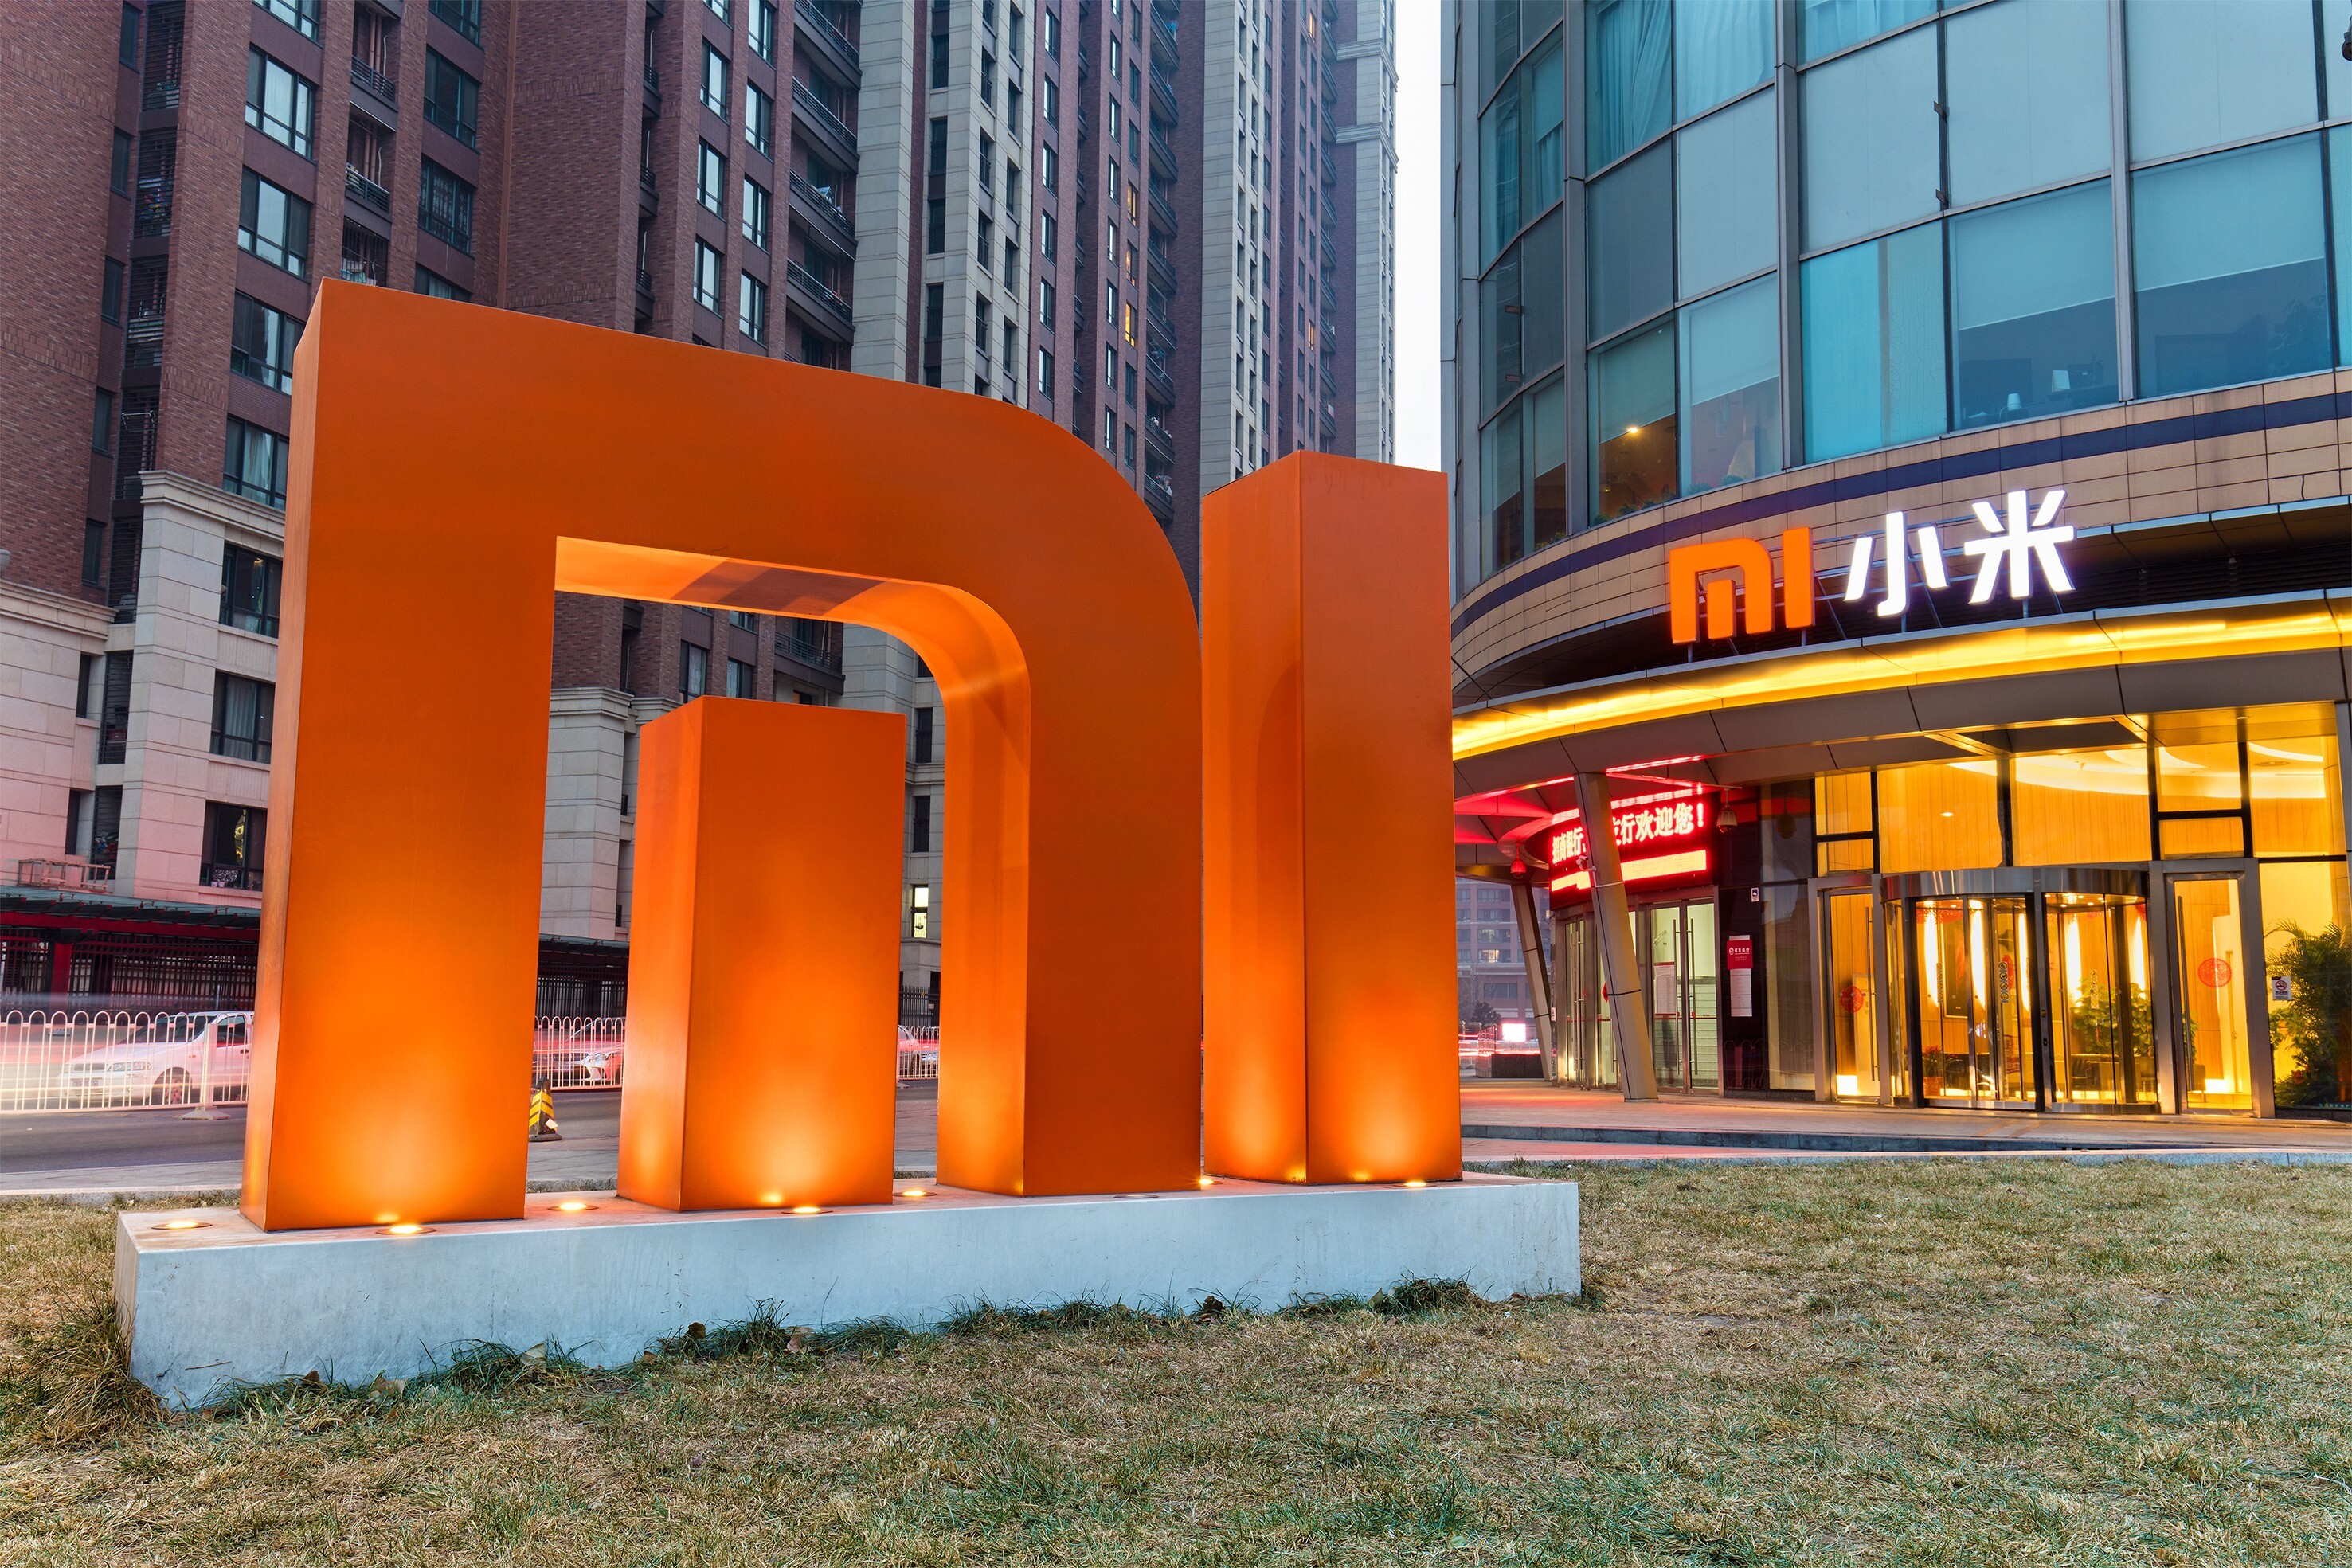 After MiTalk lost out to Tencent’s WeChat a decade ago, Xiaomi is overhauling its messaging app with a focus on audio chat, similar to Clubhouse. Photo: Shutterstock